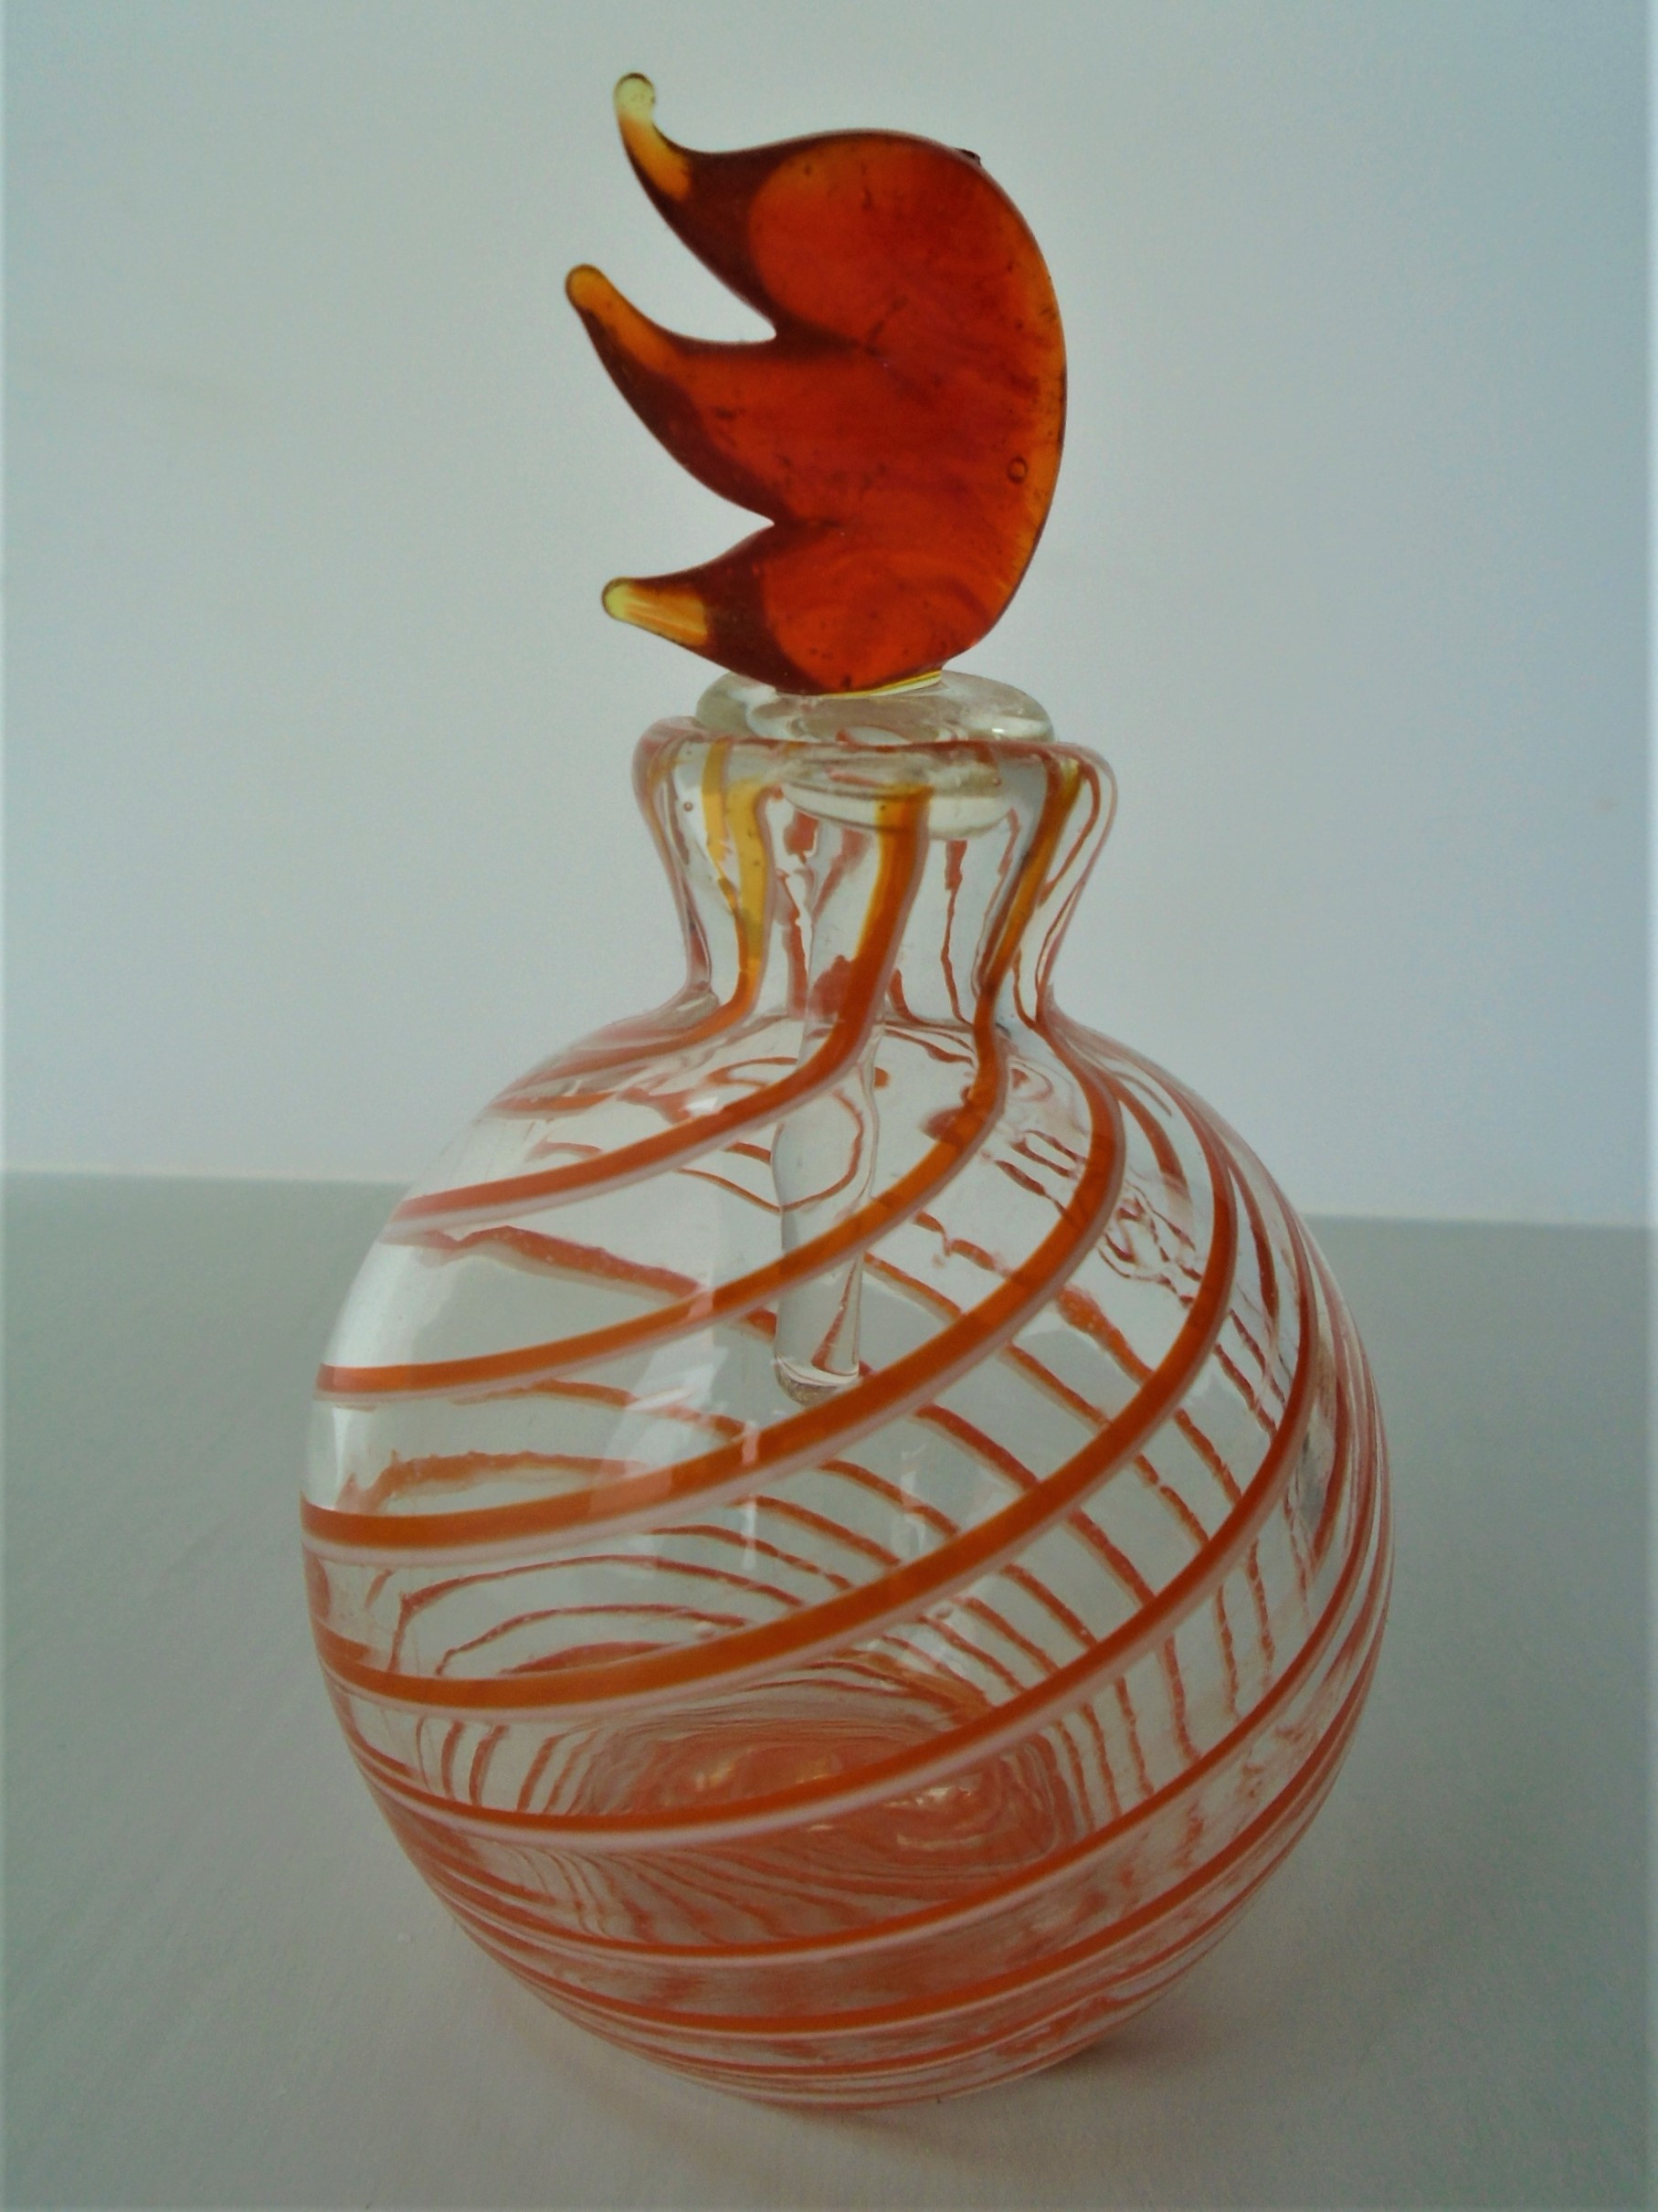 Offered for sale is a PRETTY GLASS PERFUME BOTTLE WITH  SPIRAL DECOARTION AND FLAME SHAPED STOPPER. 